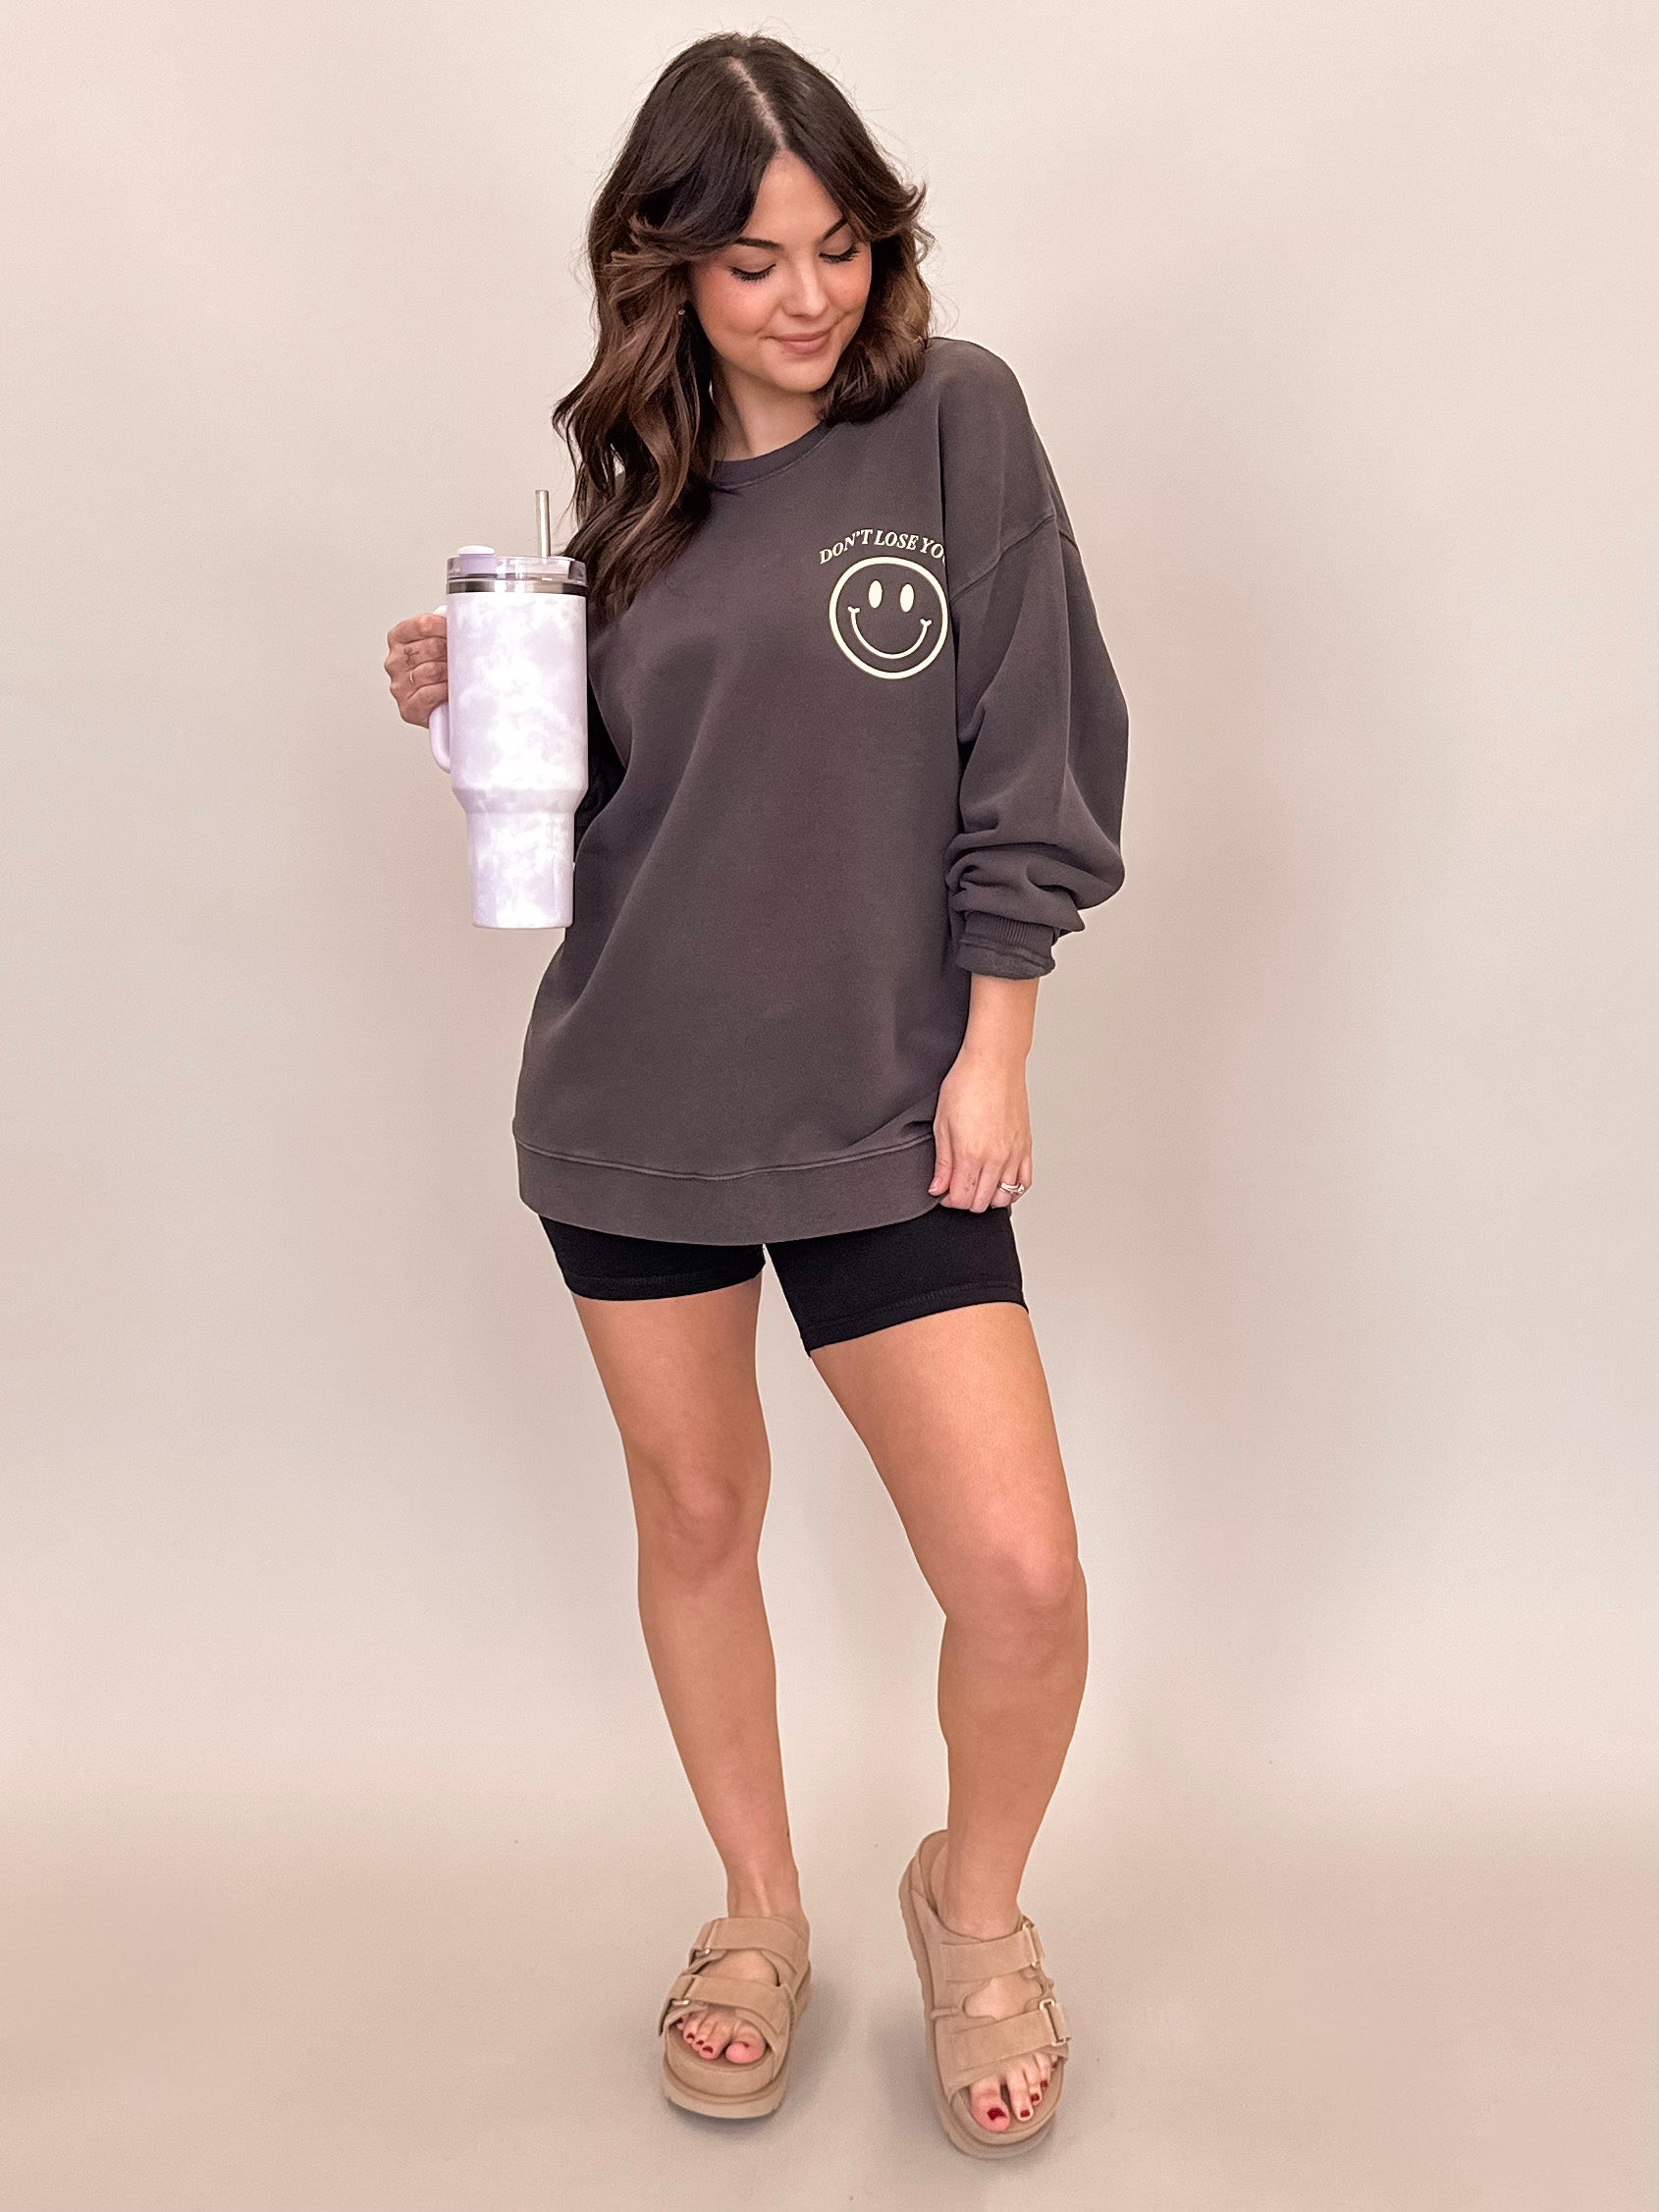 Don't Lose Your Smile Graphic Sweatshirt Look image